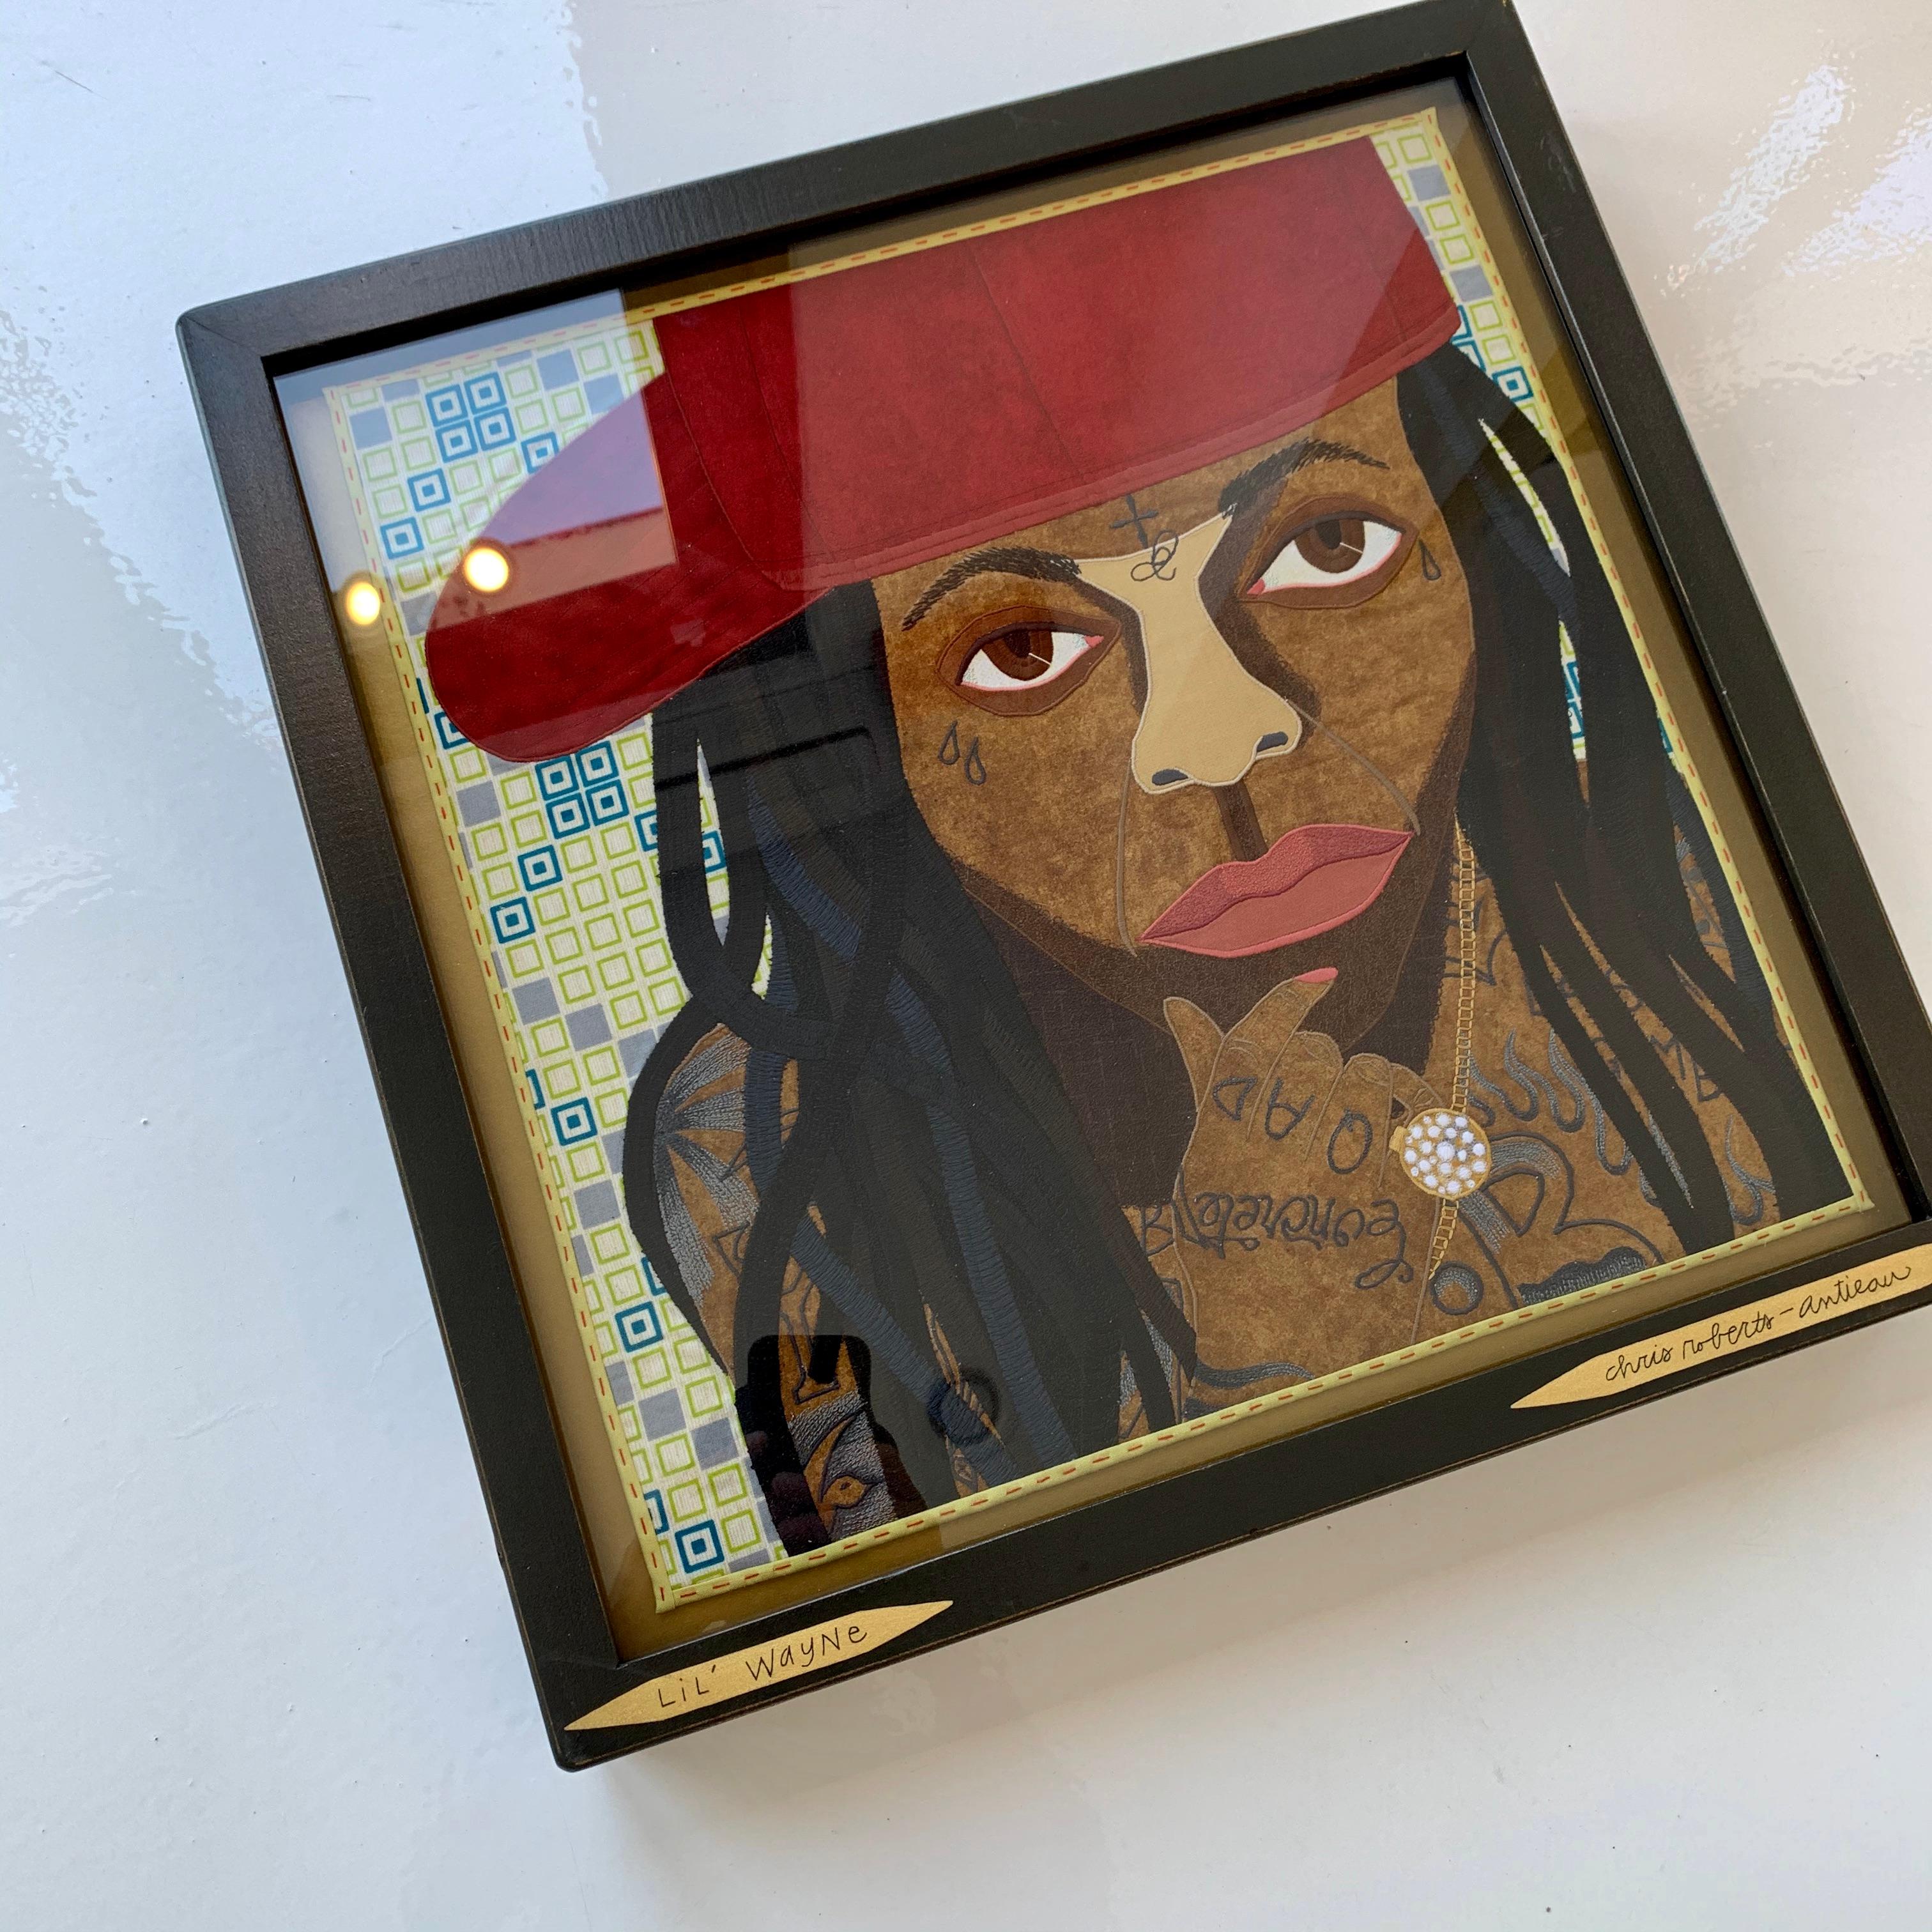 Stunning original artwork by Chris Roberts-Antieau. Hand woven tapestry depicting Lil' Wayne, aka Dwane Michael Carter Jr, the greatest rapper alive. Stunning detail, excellent condition. Framed behind acrylic with artist's original frame. Dated